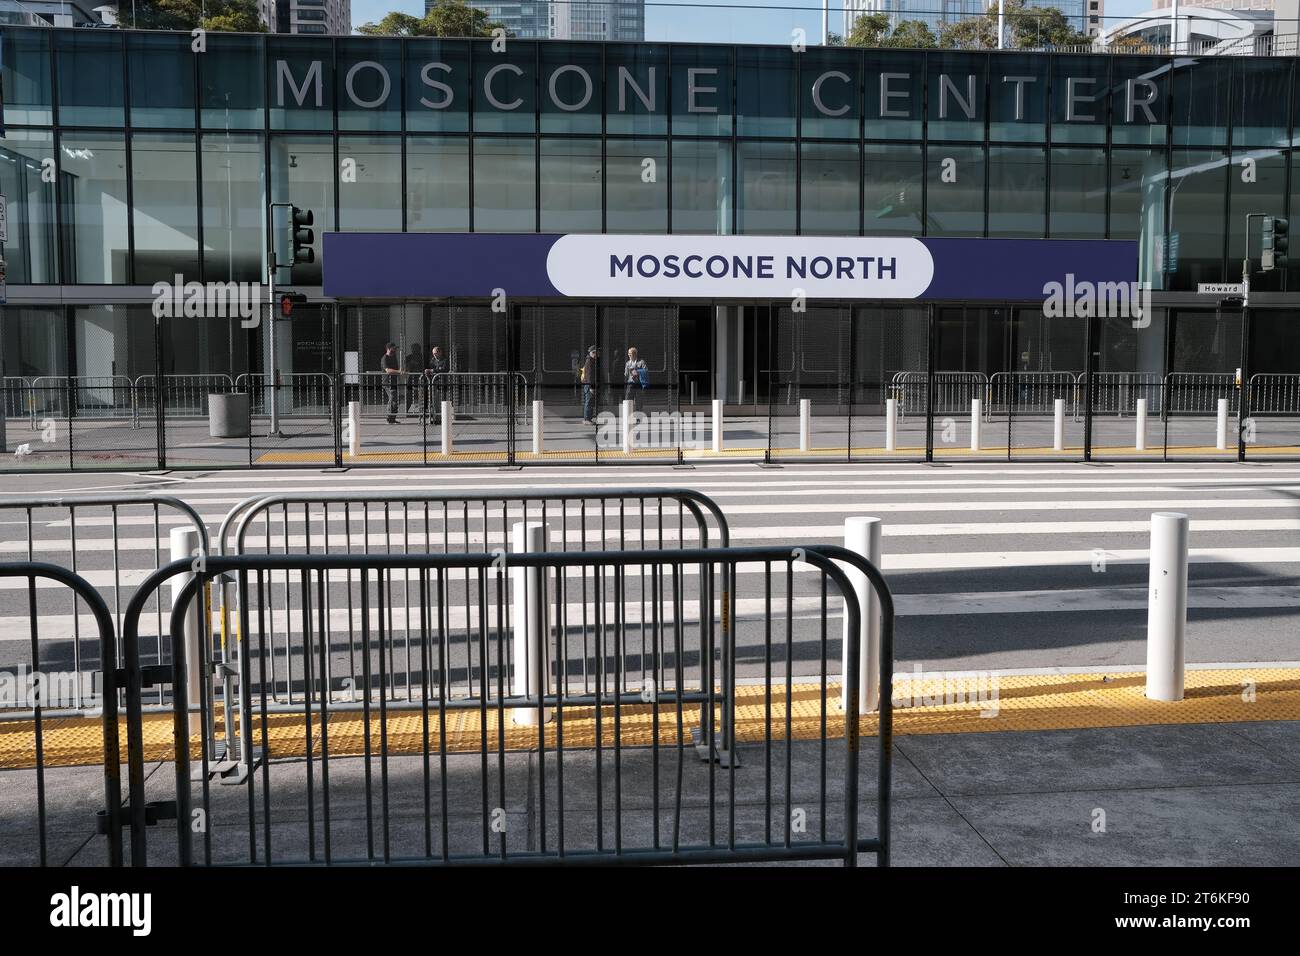 The Moscone Center is fenced in by the railings. The Asia-Pacific Economic Cooperation (APEC) is scheduled to hold its 2023 summit in San Francisco, California, from November 11 to November 17, primarily at the Moscone Center. The summit will bring together leaders and business representatives from various countries to engage in discussions on a range of issues. Notable figures such as President Joe Biden of the United States and President Xi Jinping of the People's Republic of China are expected to attend and meet during the summit. In preparation, streets and roads in the vicinity of the Mos Stock Photo